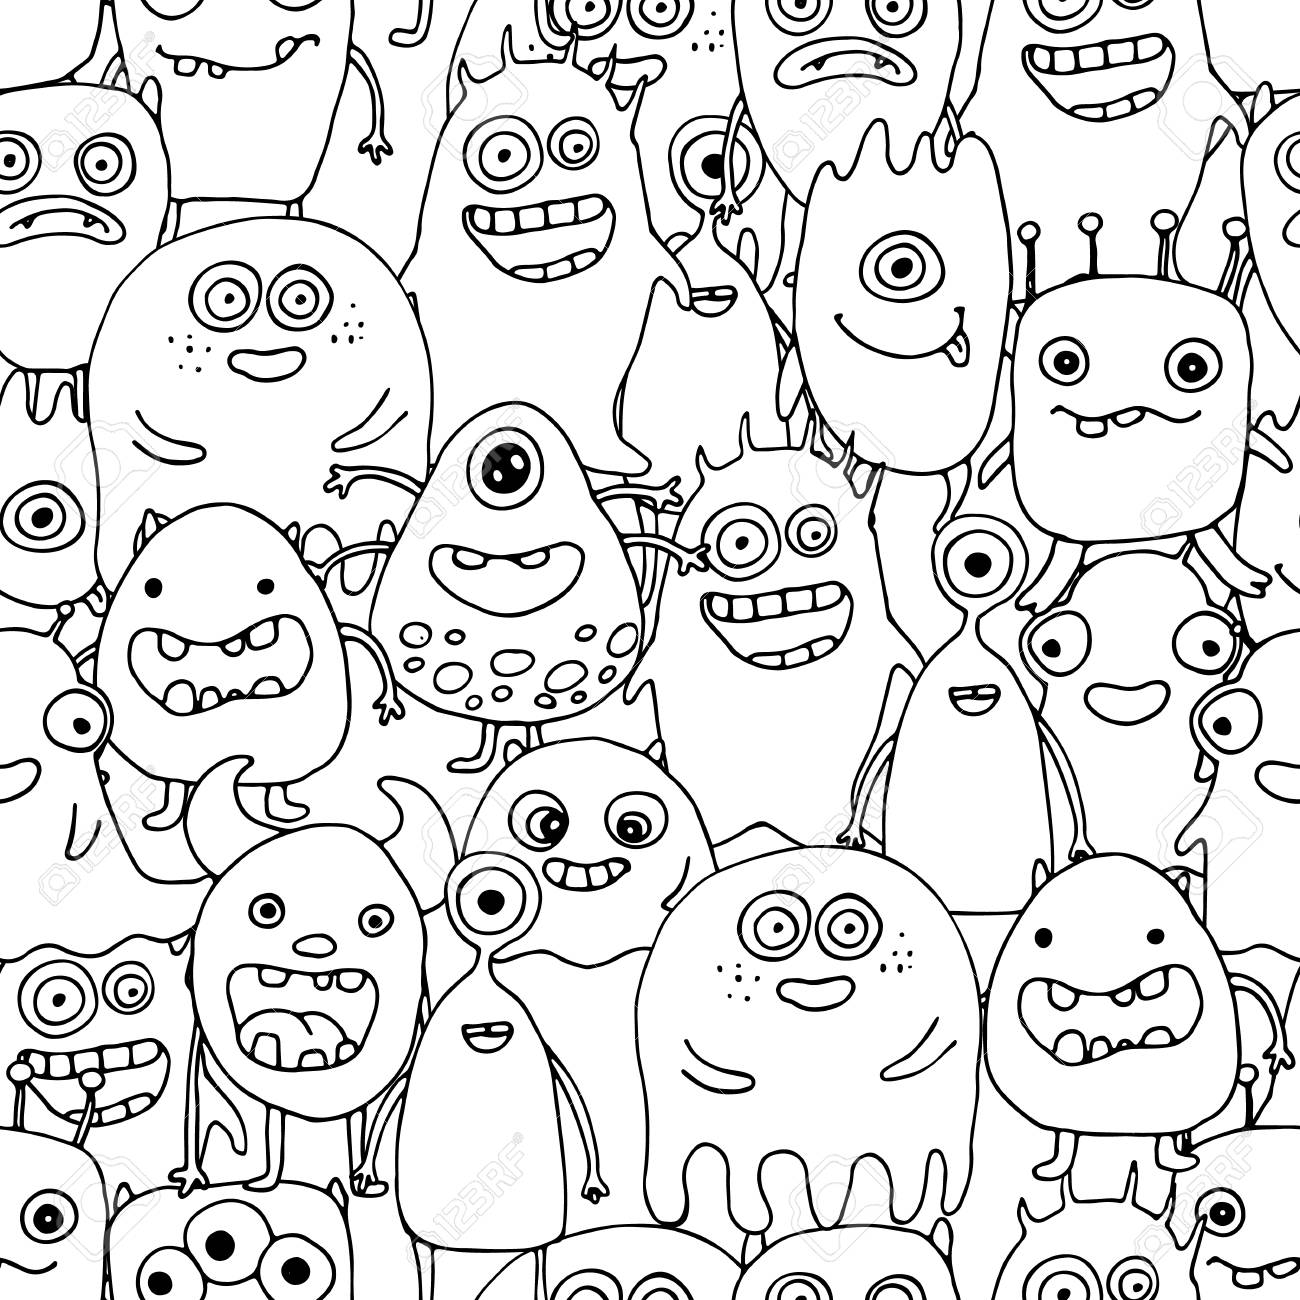 Coloring pages monster coloring pages best monsters